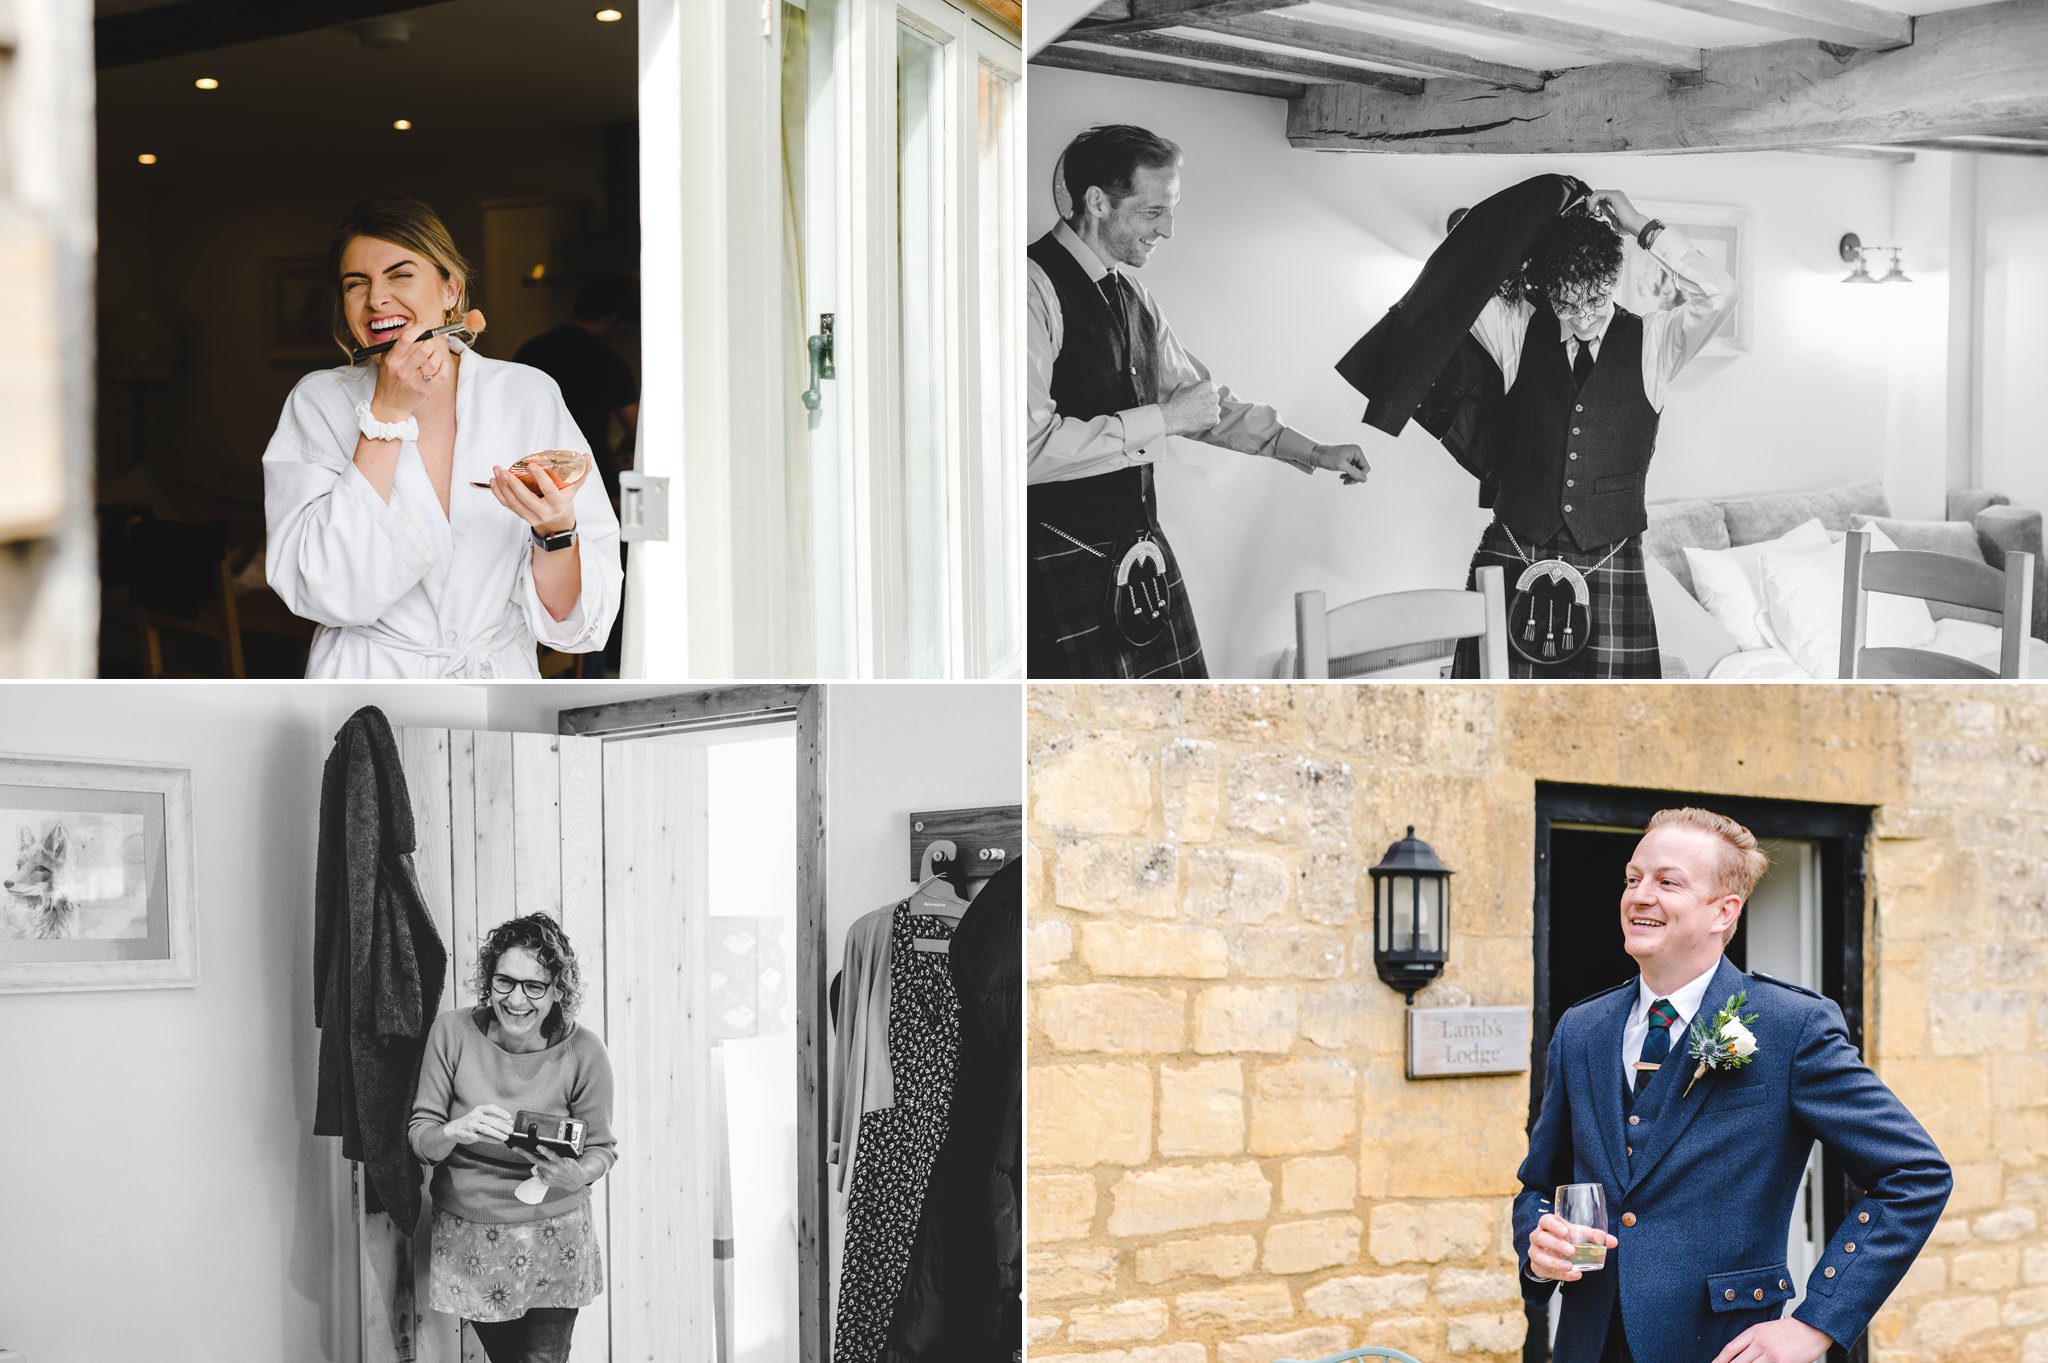 Guests getting reading for their north cotswolds wedding day